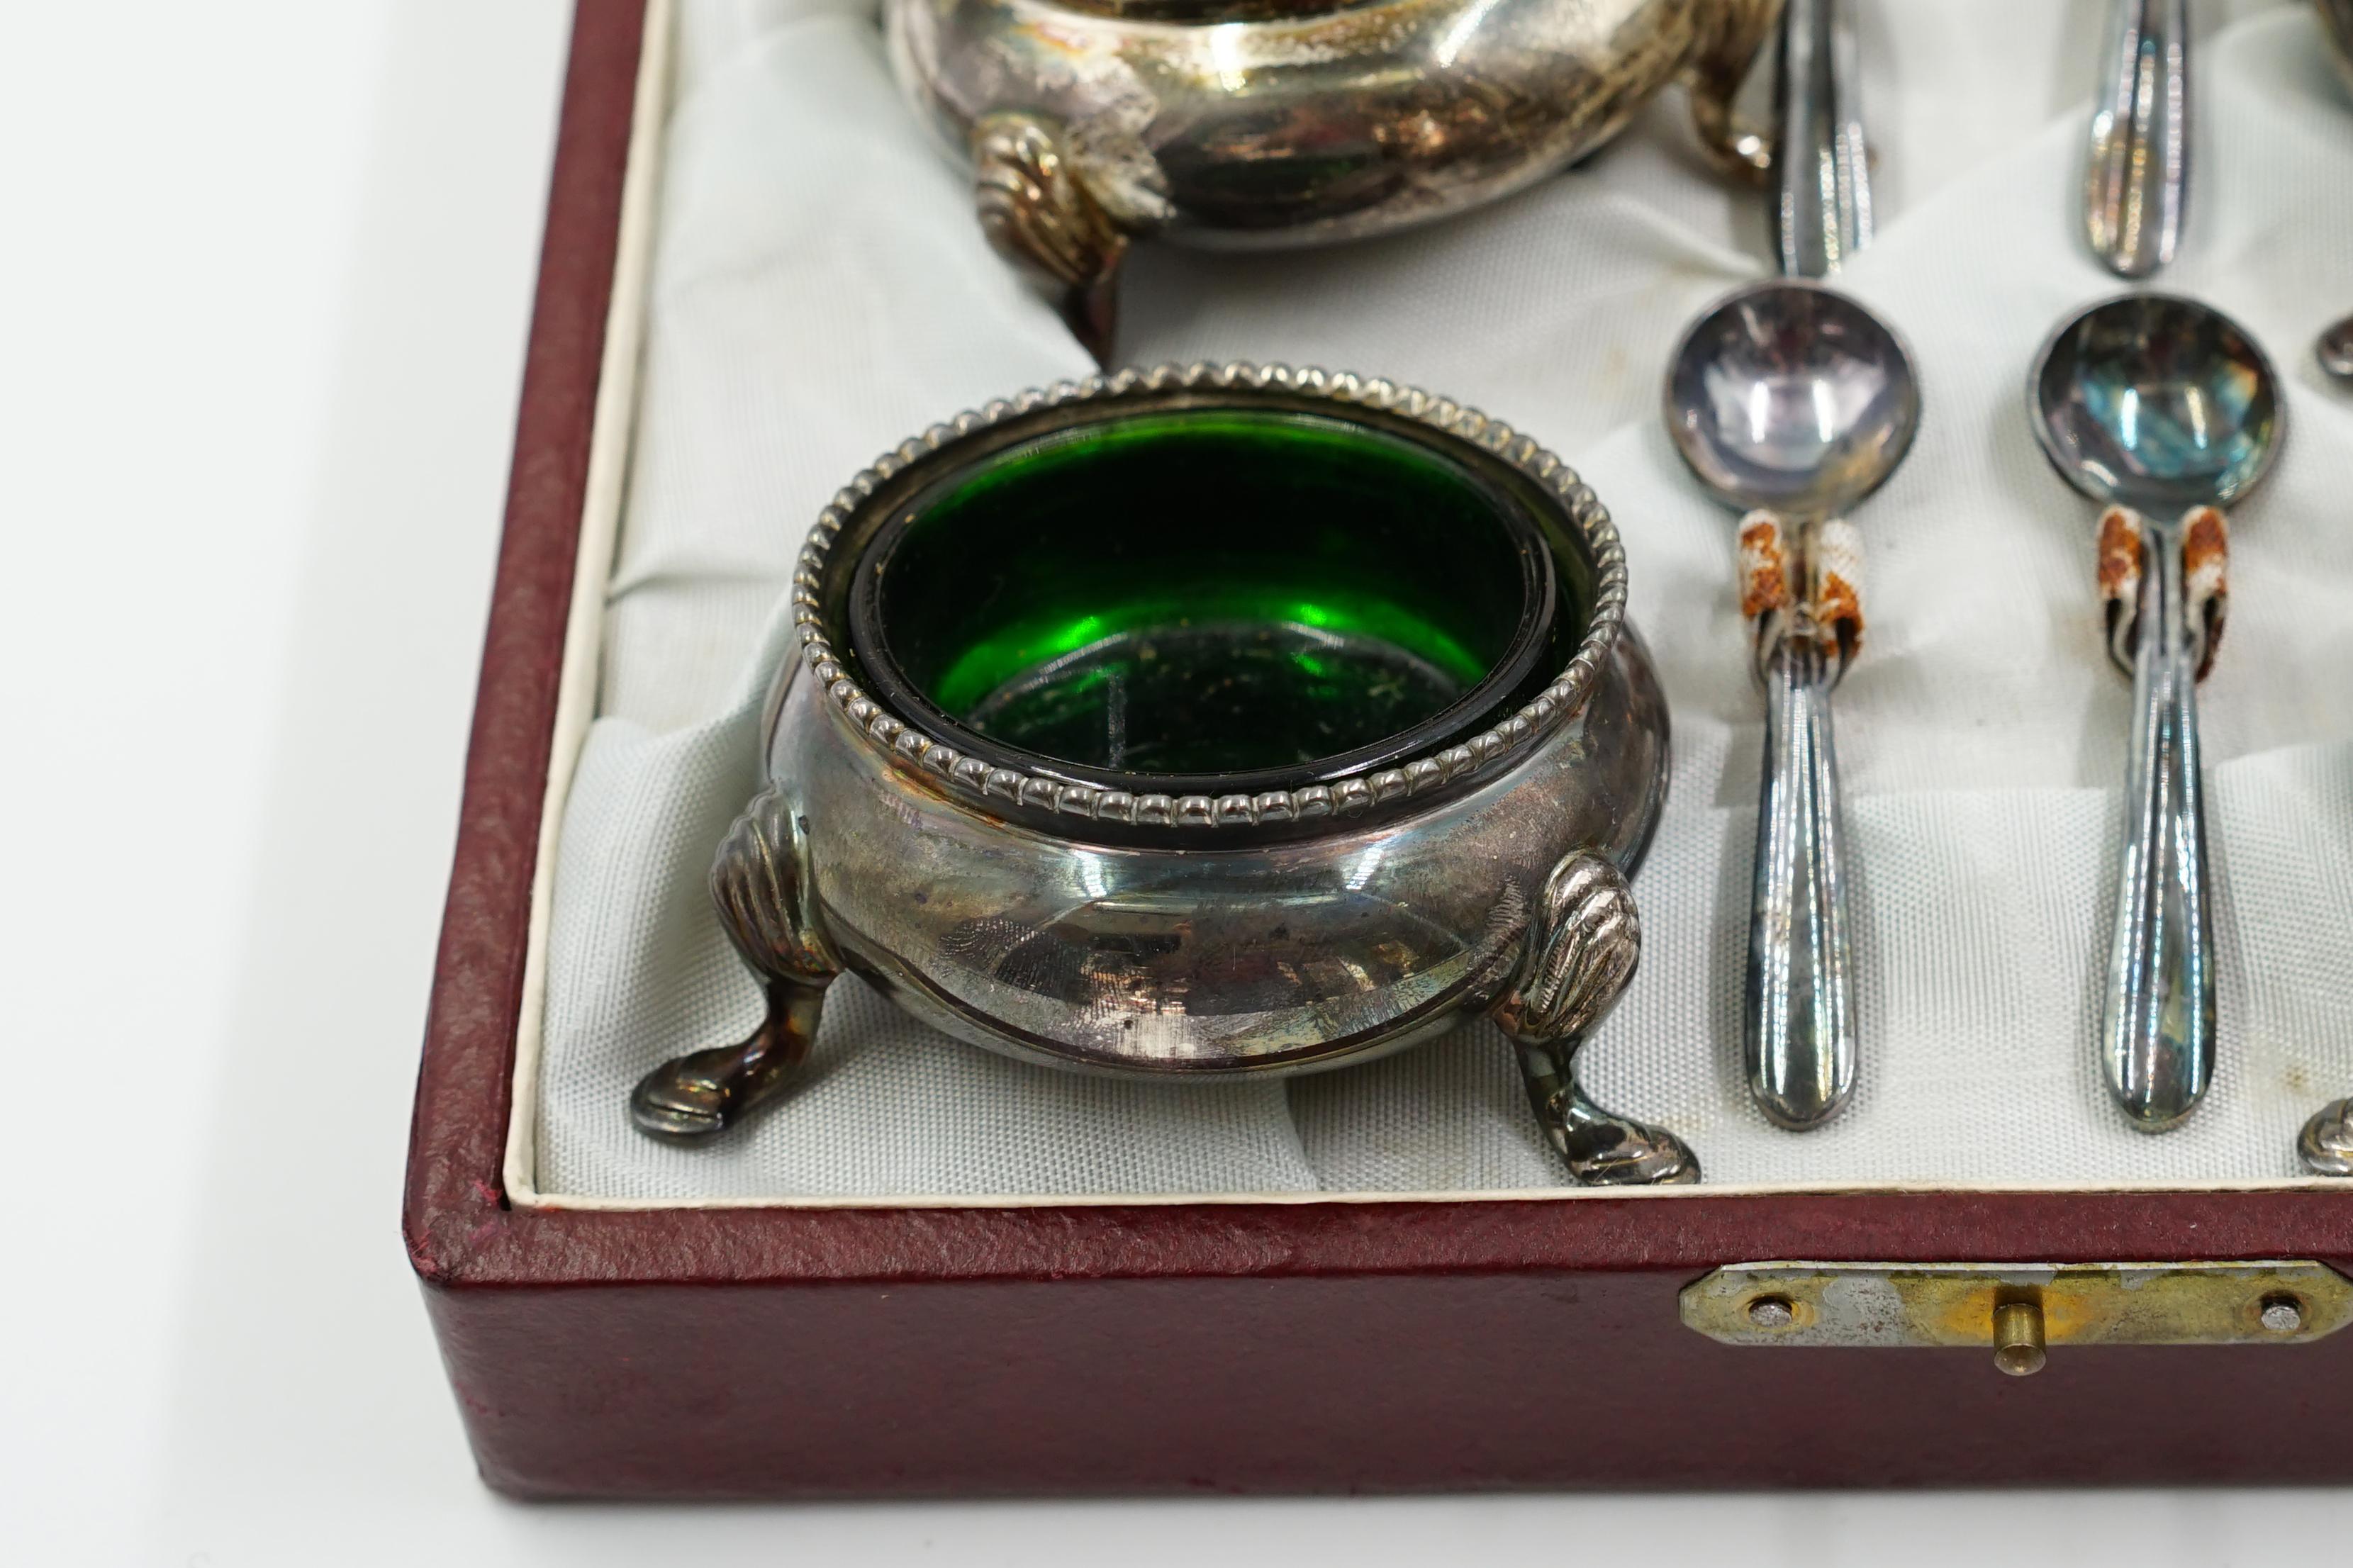 Case with solid silver salt and pepper bowls
green glass and solid silver bowls for salt and pepper
Excellent condition, without restoration and with its original crystals.
sealed in its 925 sterling base
Circa 1940 Origin Argentina
Measures
SPOONS: